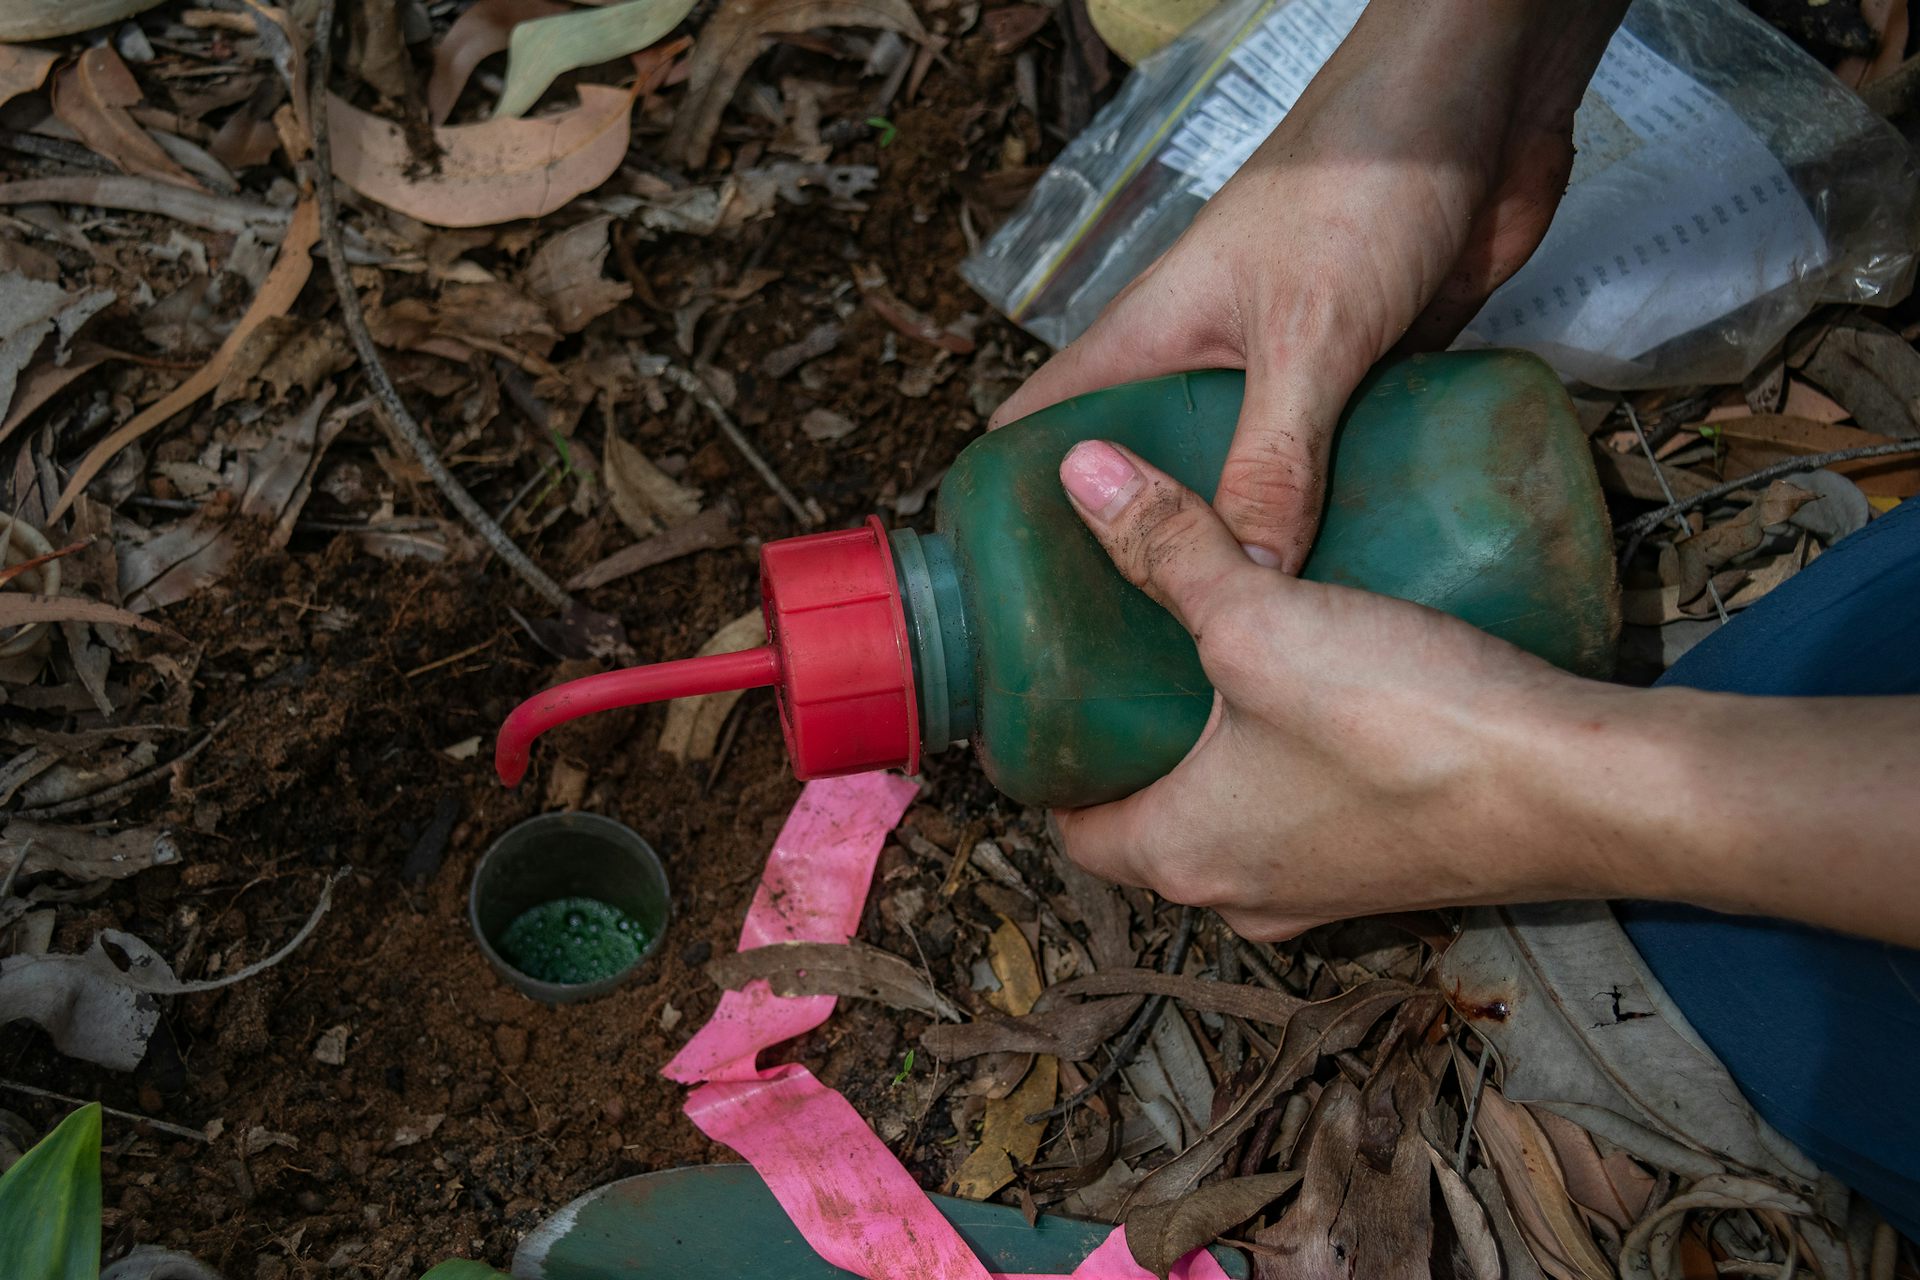 hand squeezes bottle of green liquid into hole in ground